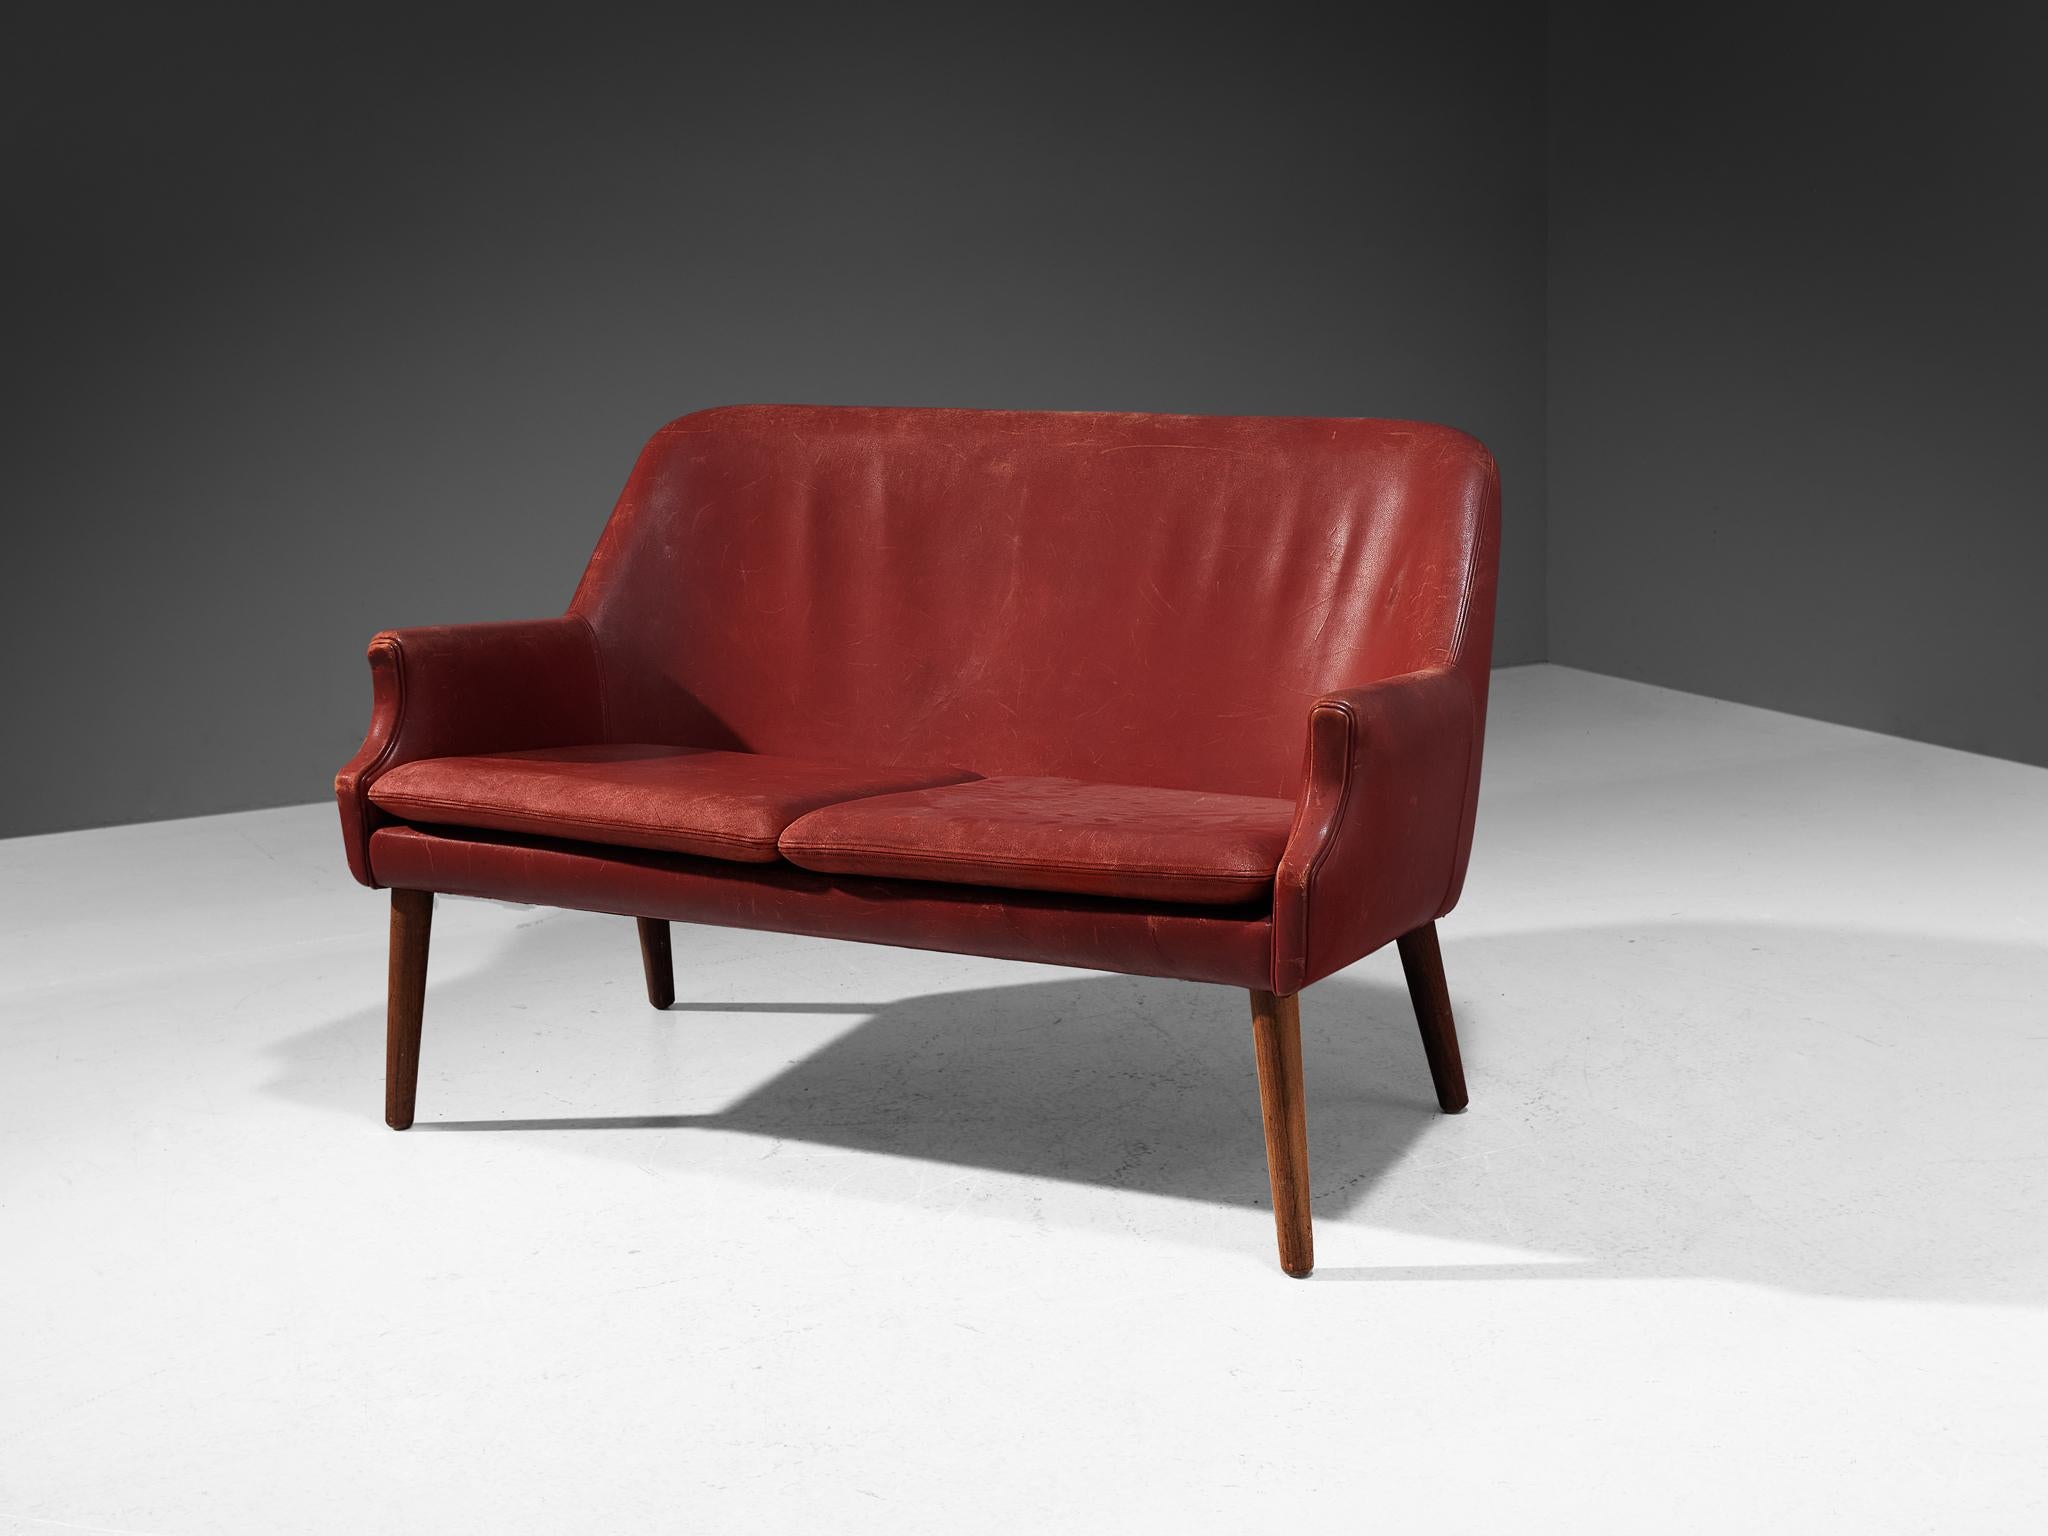 Sofa or settee, leather, wood, Scandinavia, 1950s

A beautifully sculpted sofa in the style of Danish designer Arne Vodder. The high back is slightly curved and runs smoothly over into the pointed armrests. The tapered wooden legs provide a nice